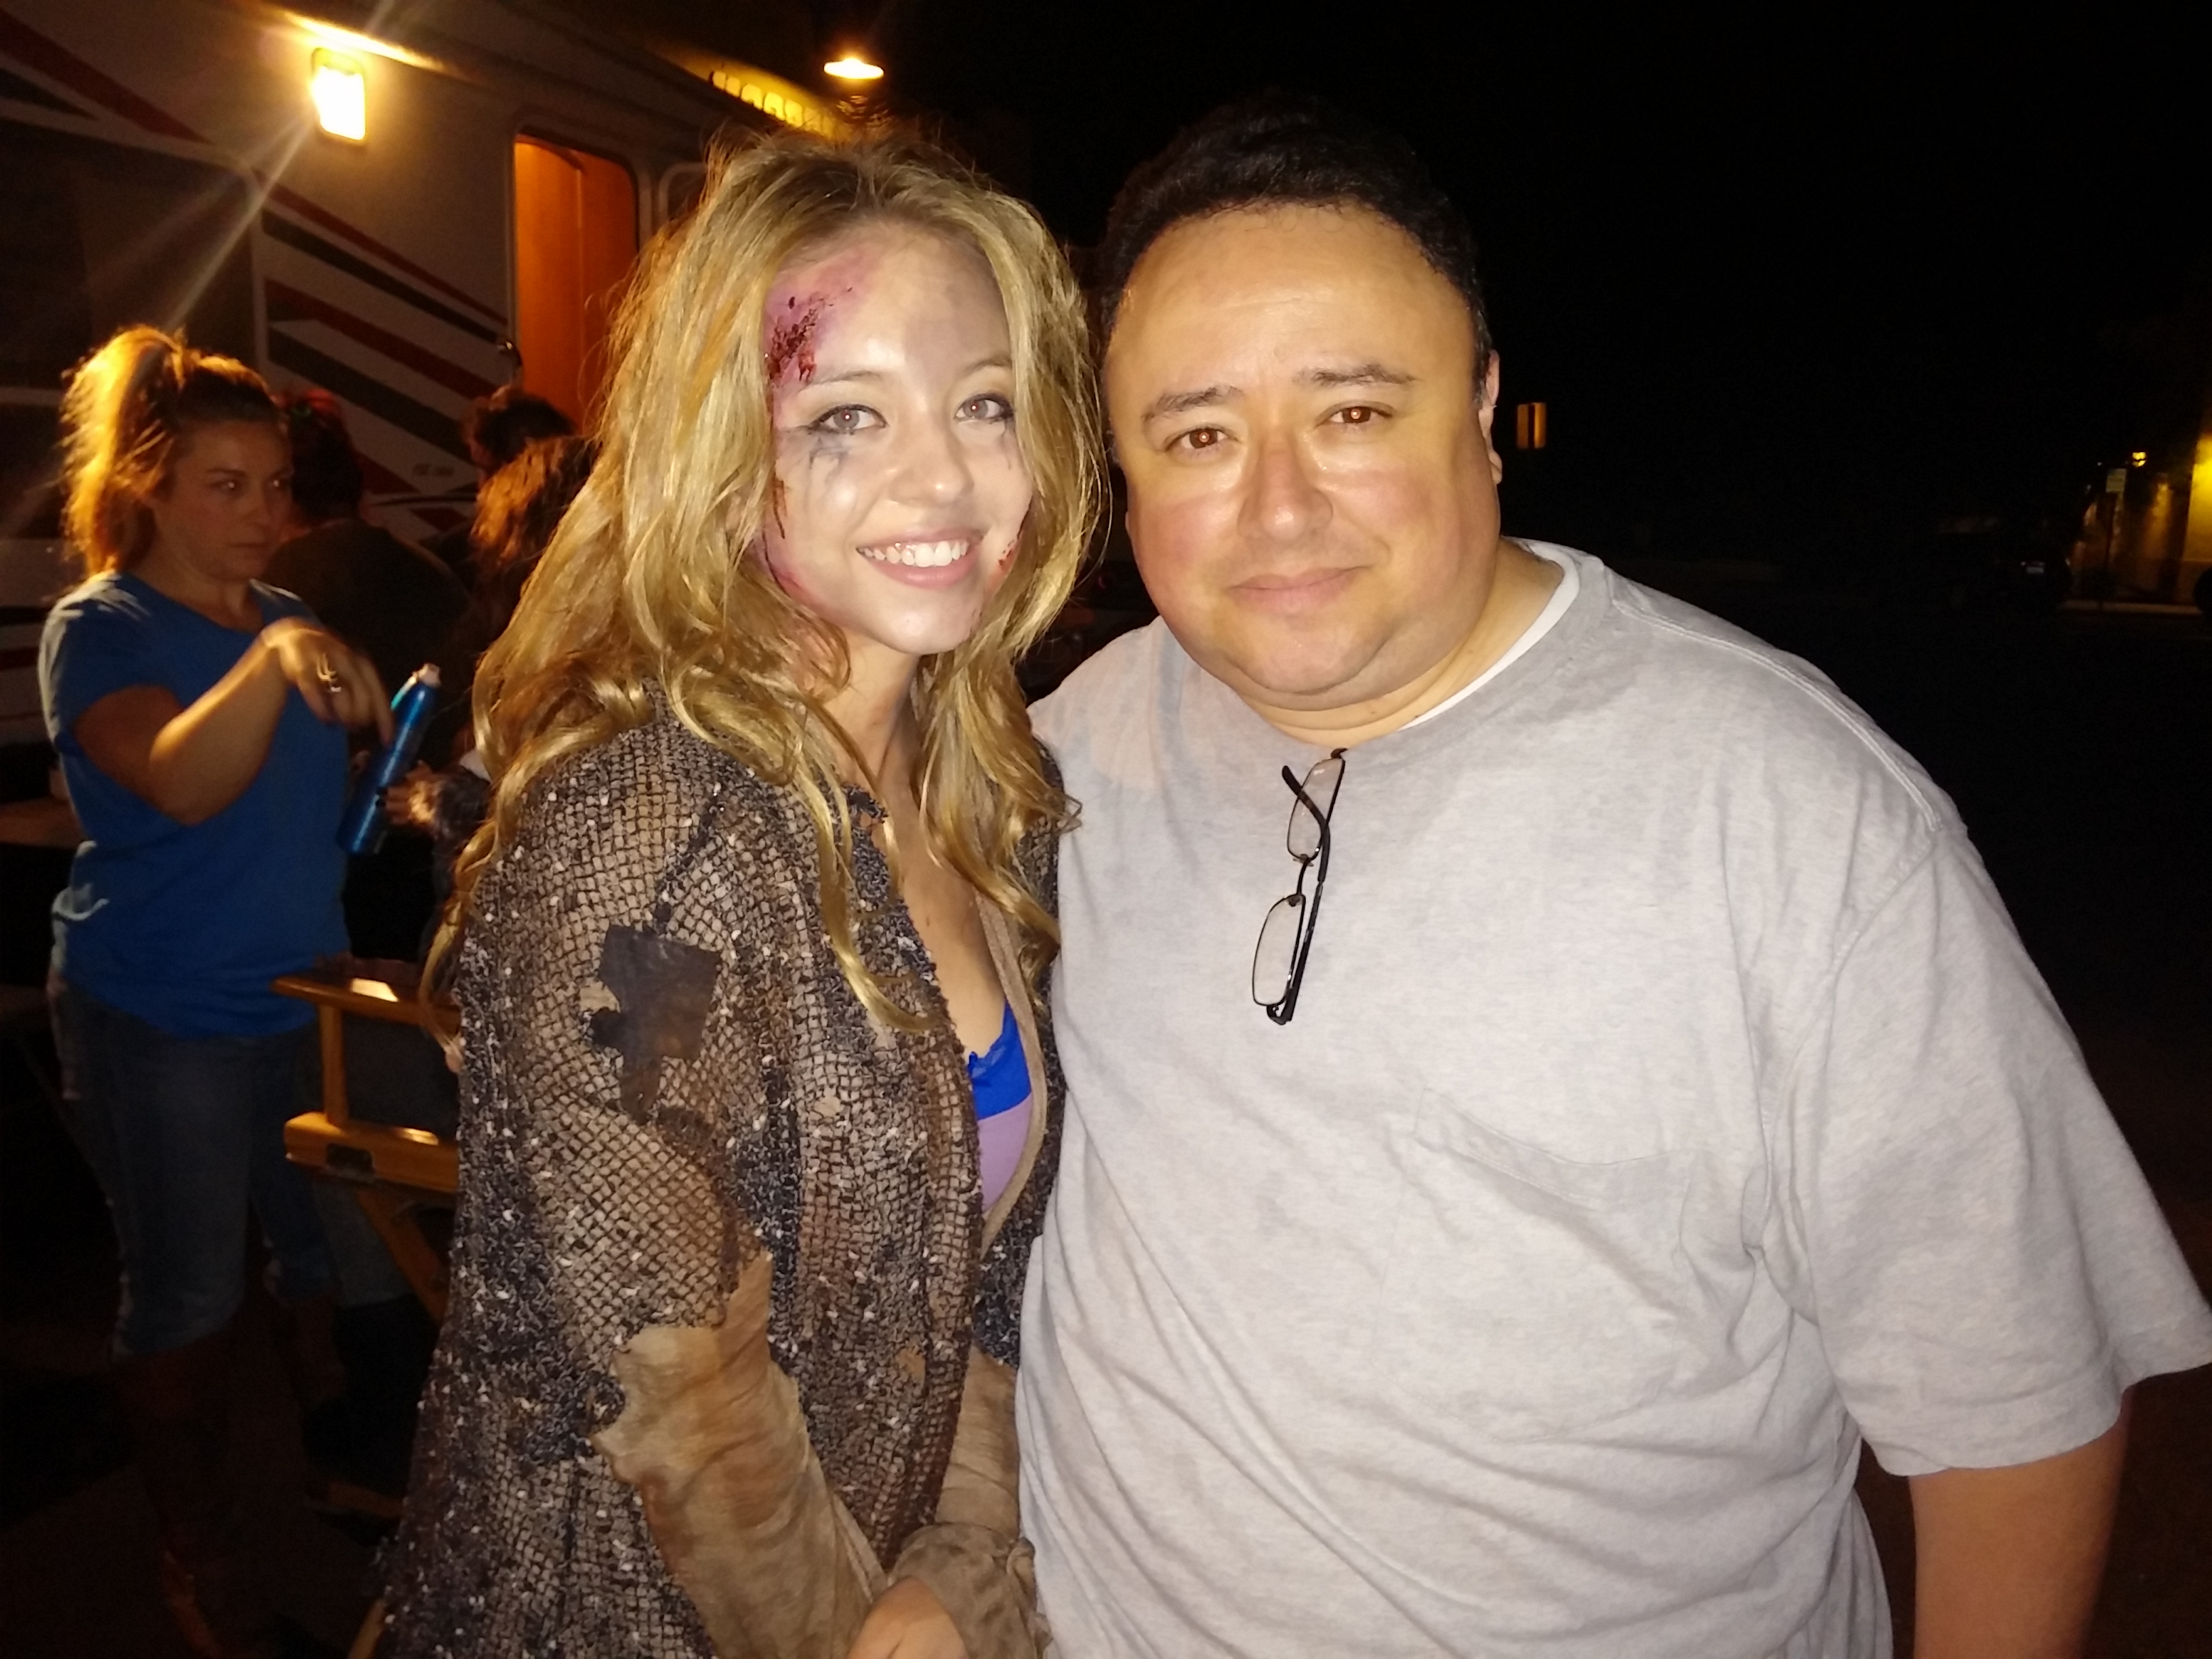 Gabriel Campisi with Sydney Sweeney on the set of The Horde.